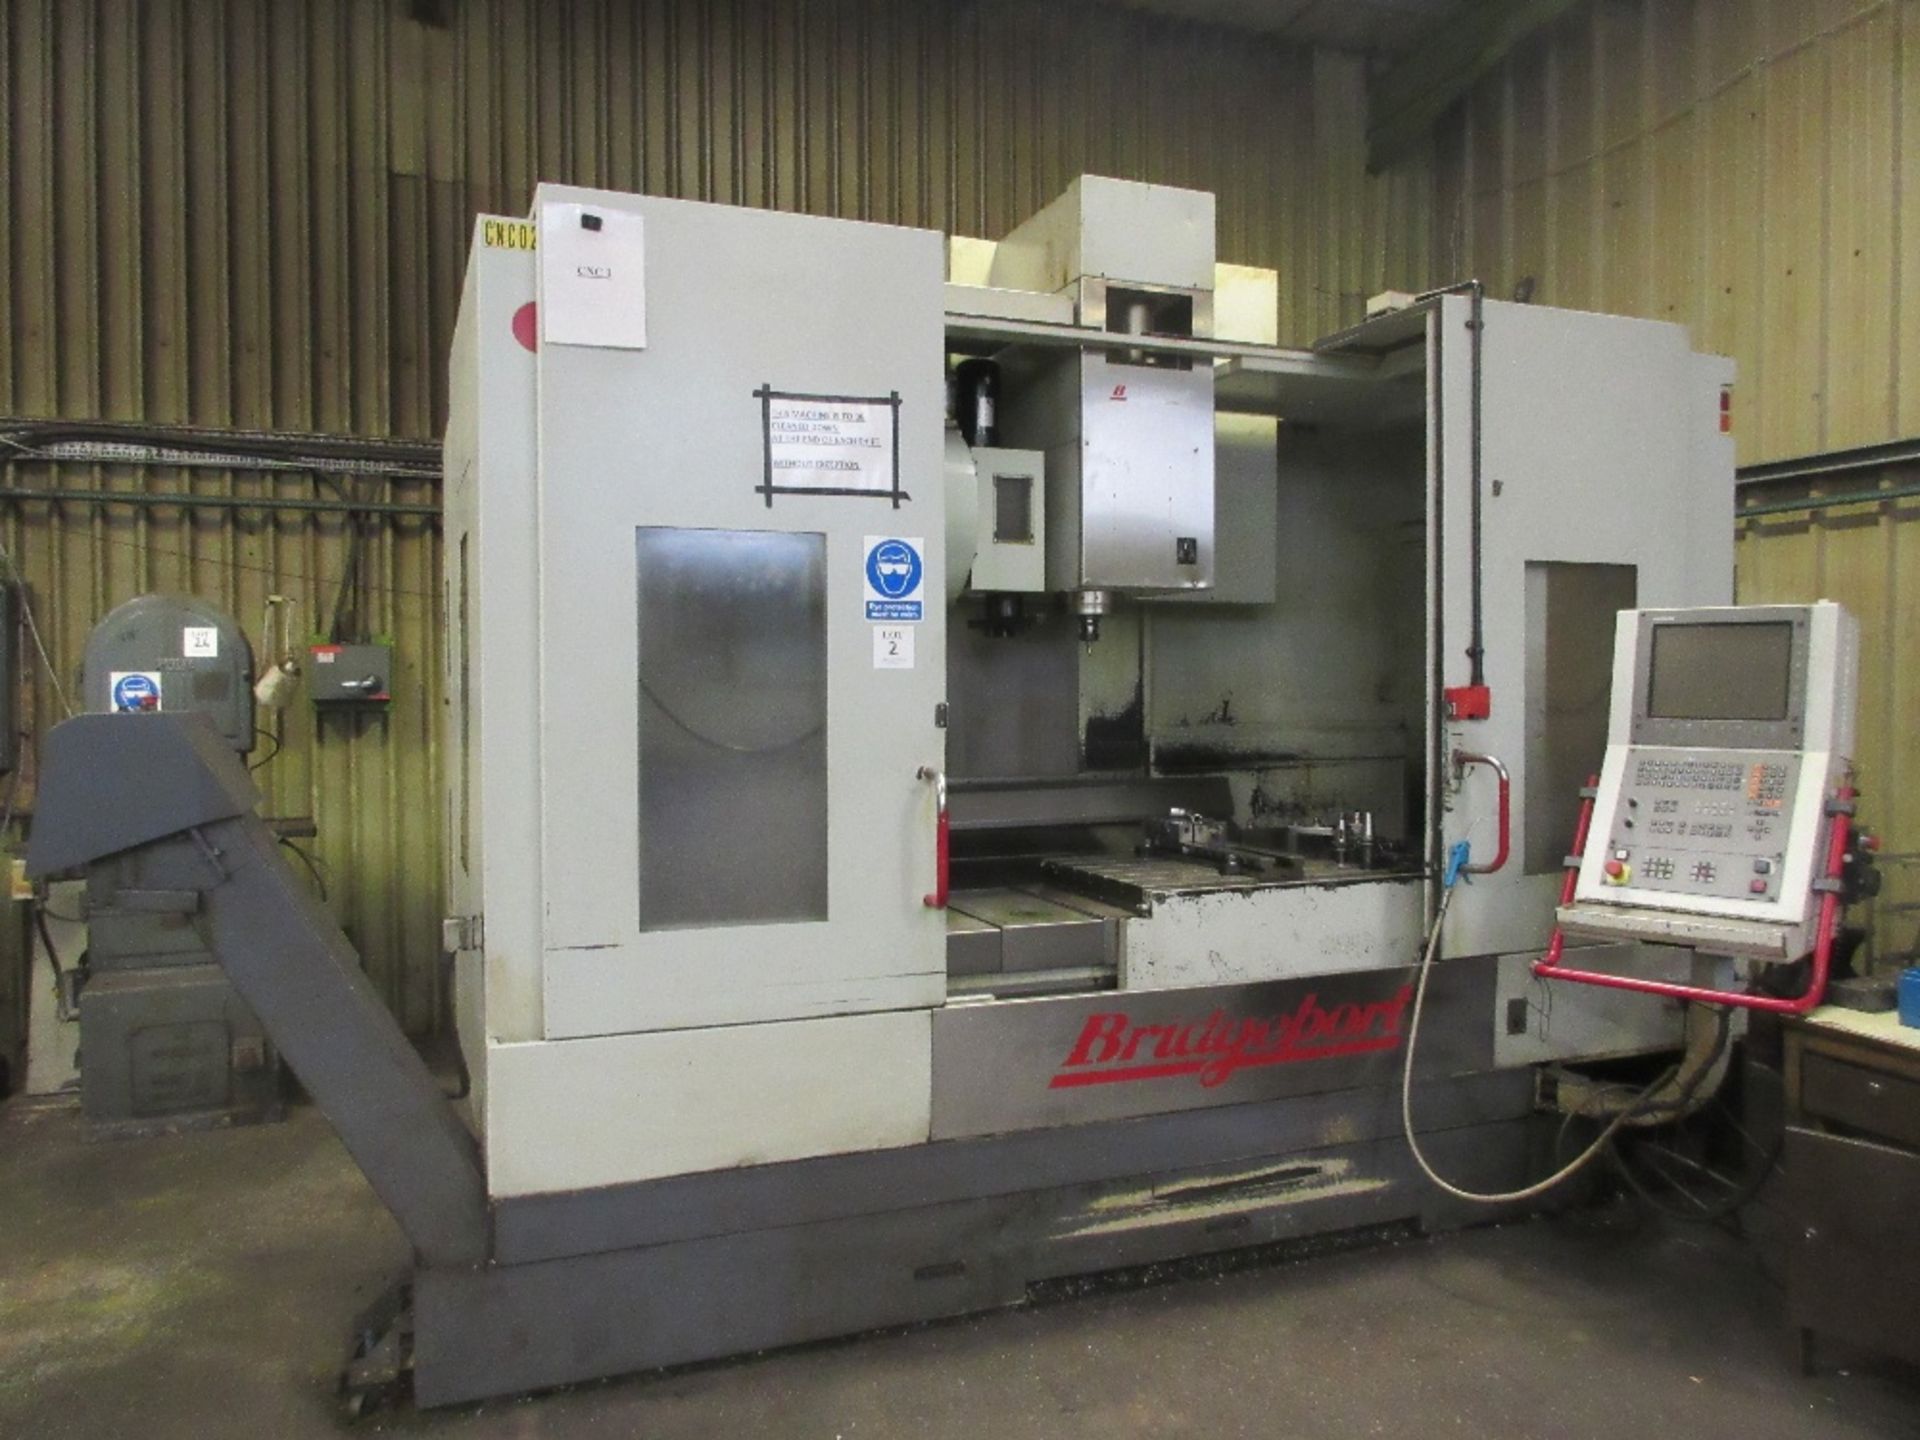 Bridgeport VMC 1500 XP3 CNC vertical machining centre. Serial No. 200L022. Year 2004 complete with